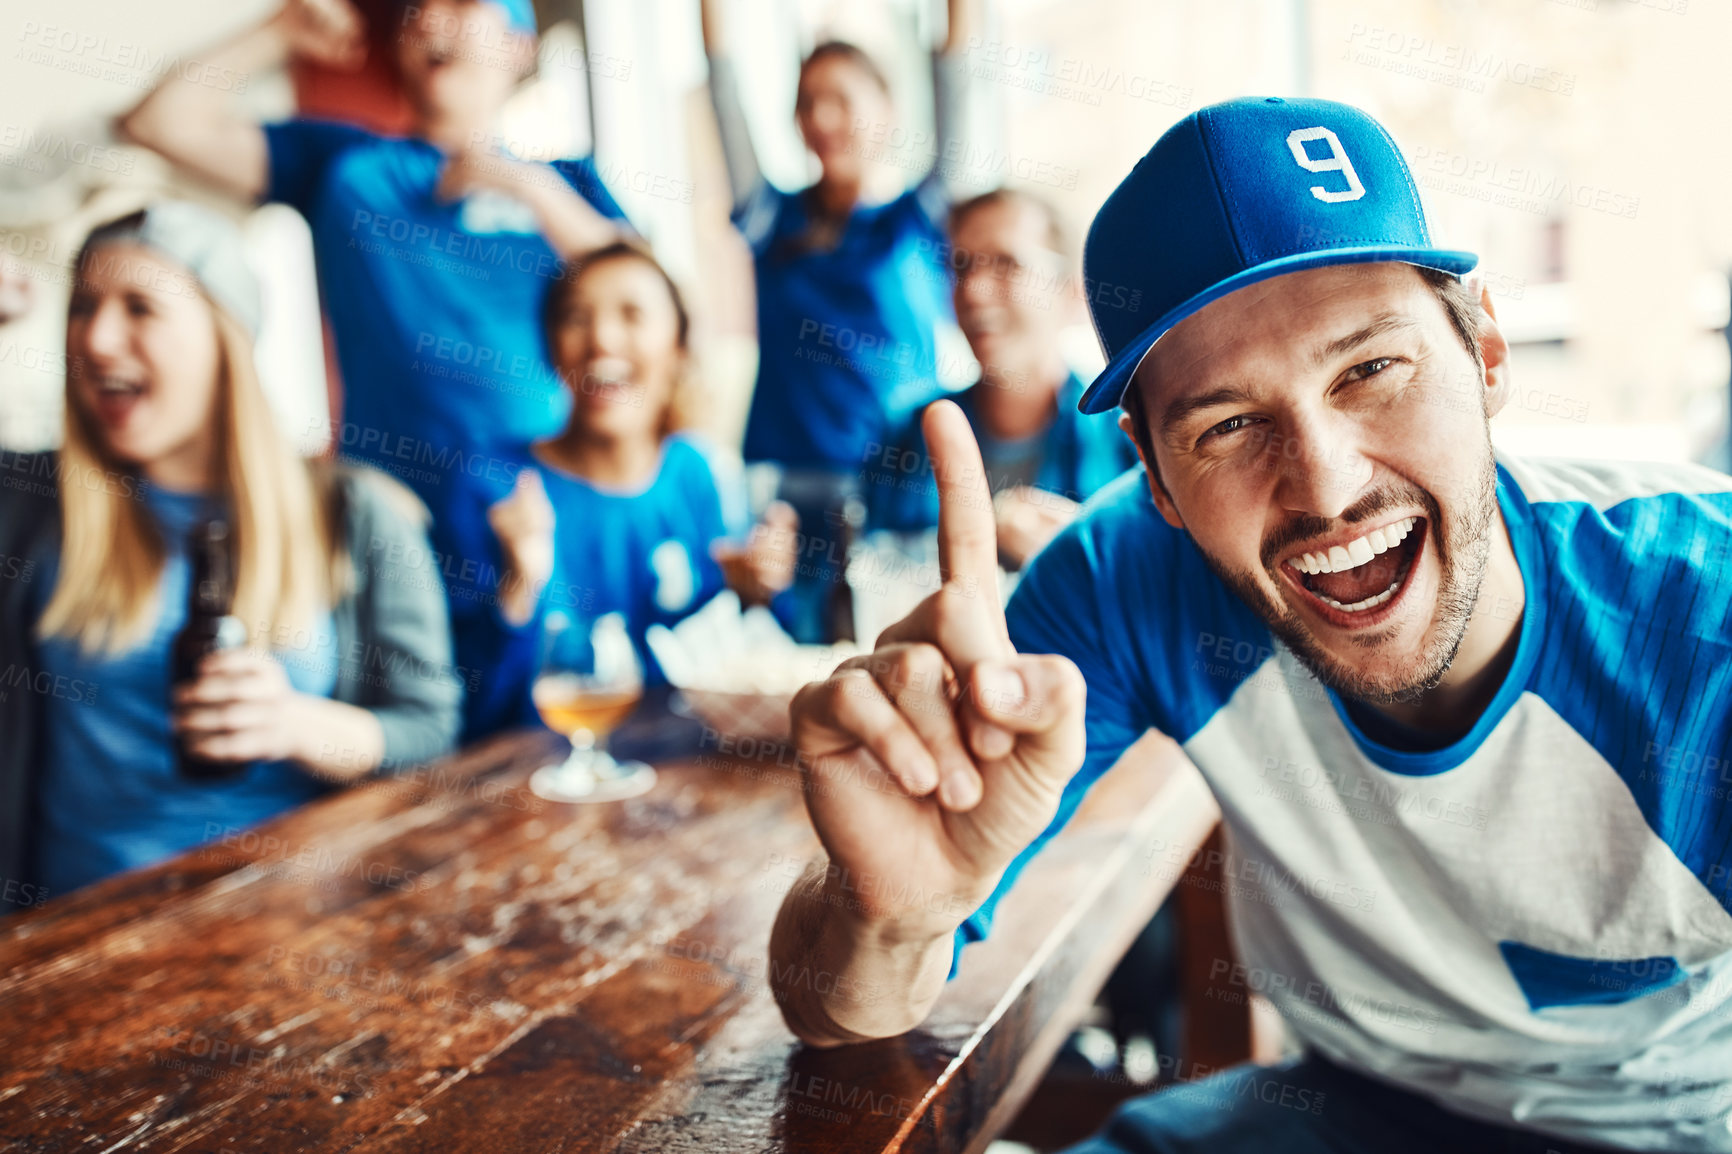 Buy stock photo Portrait of a man holding up one finger while watching a sports game with friends at a bar